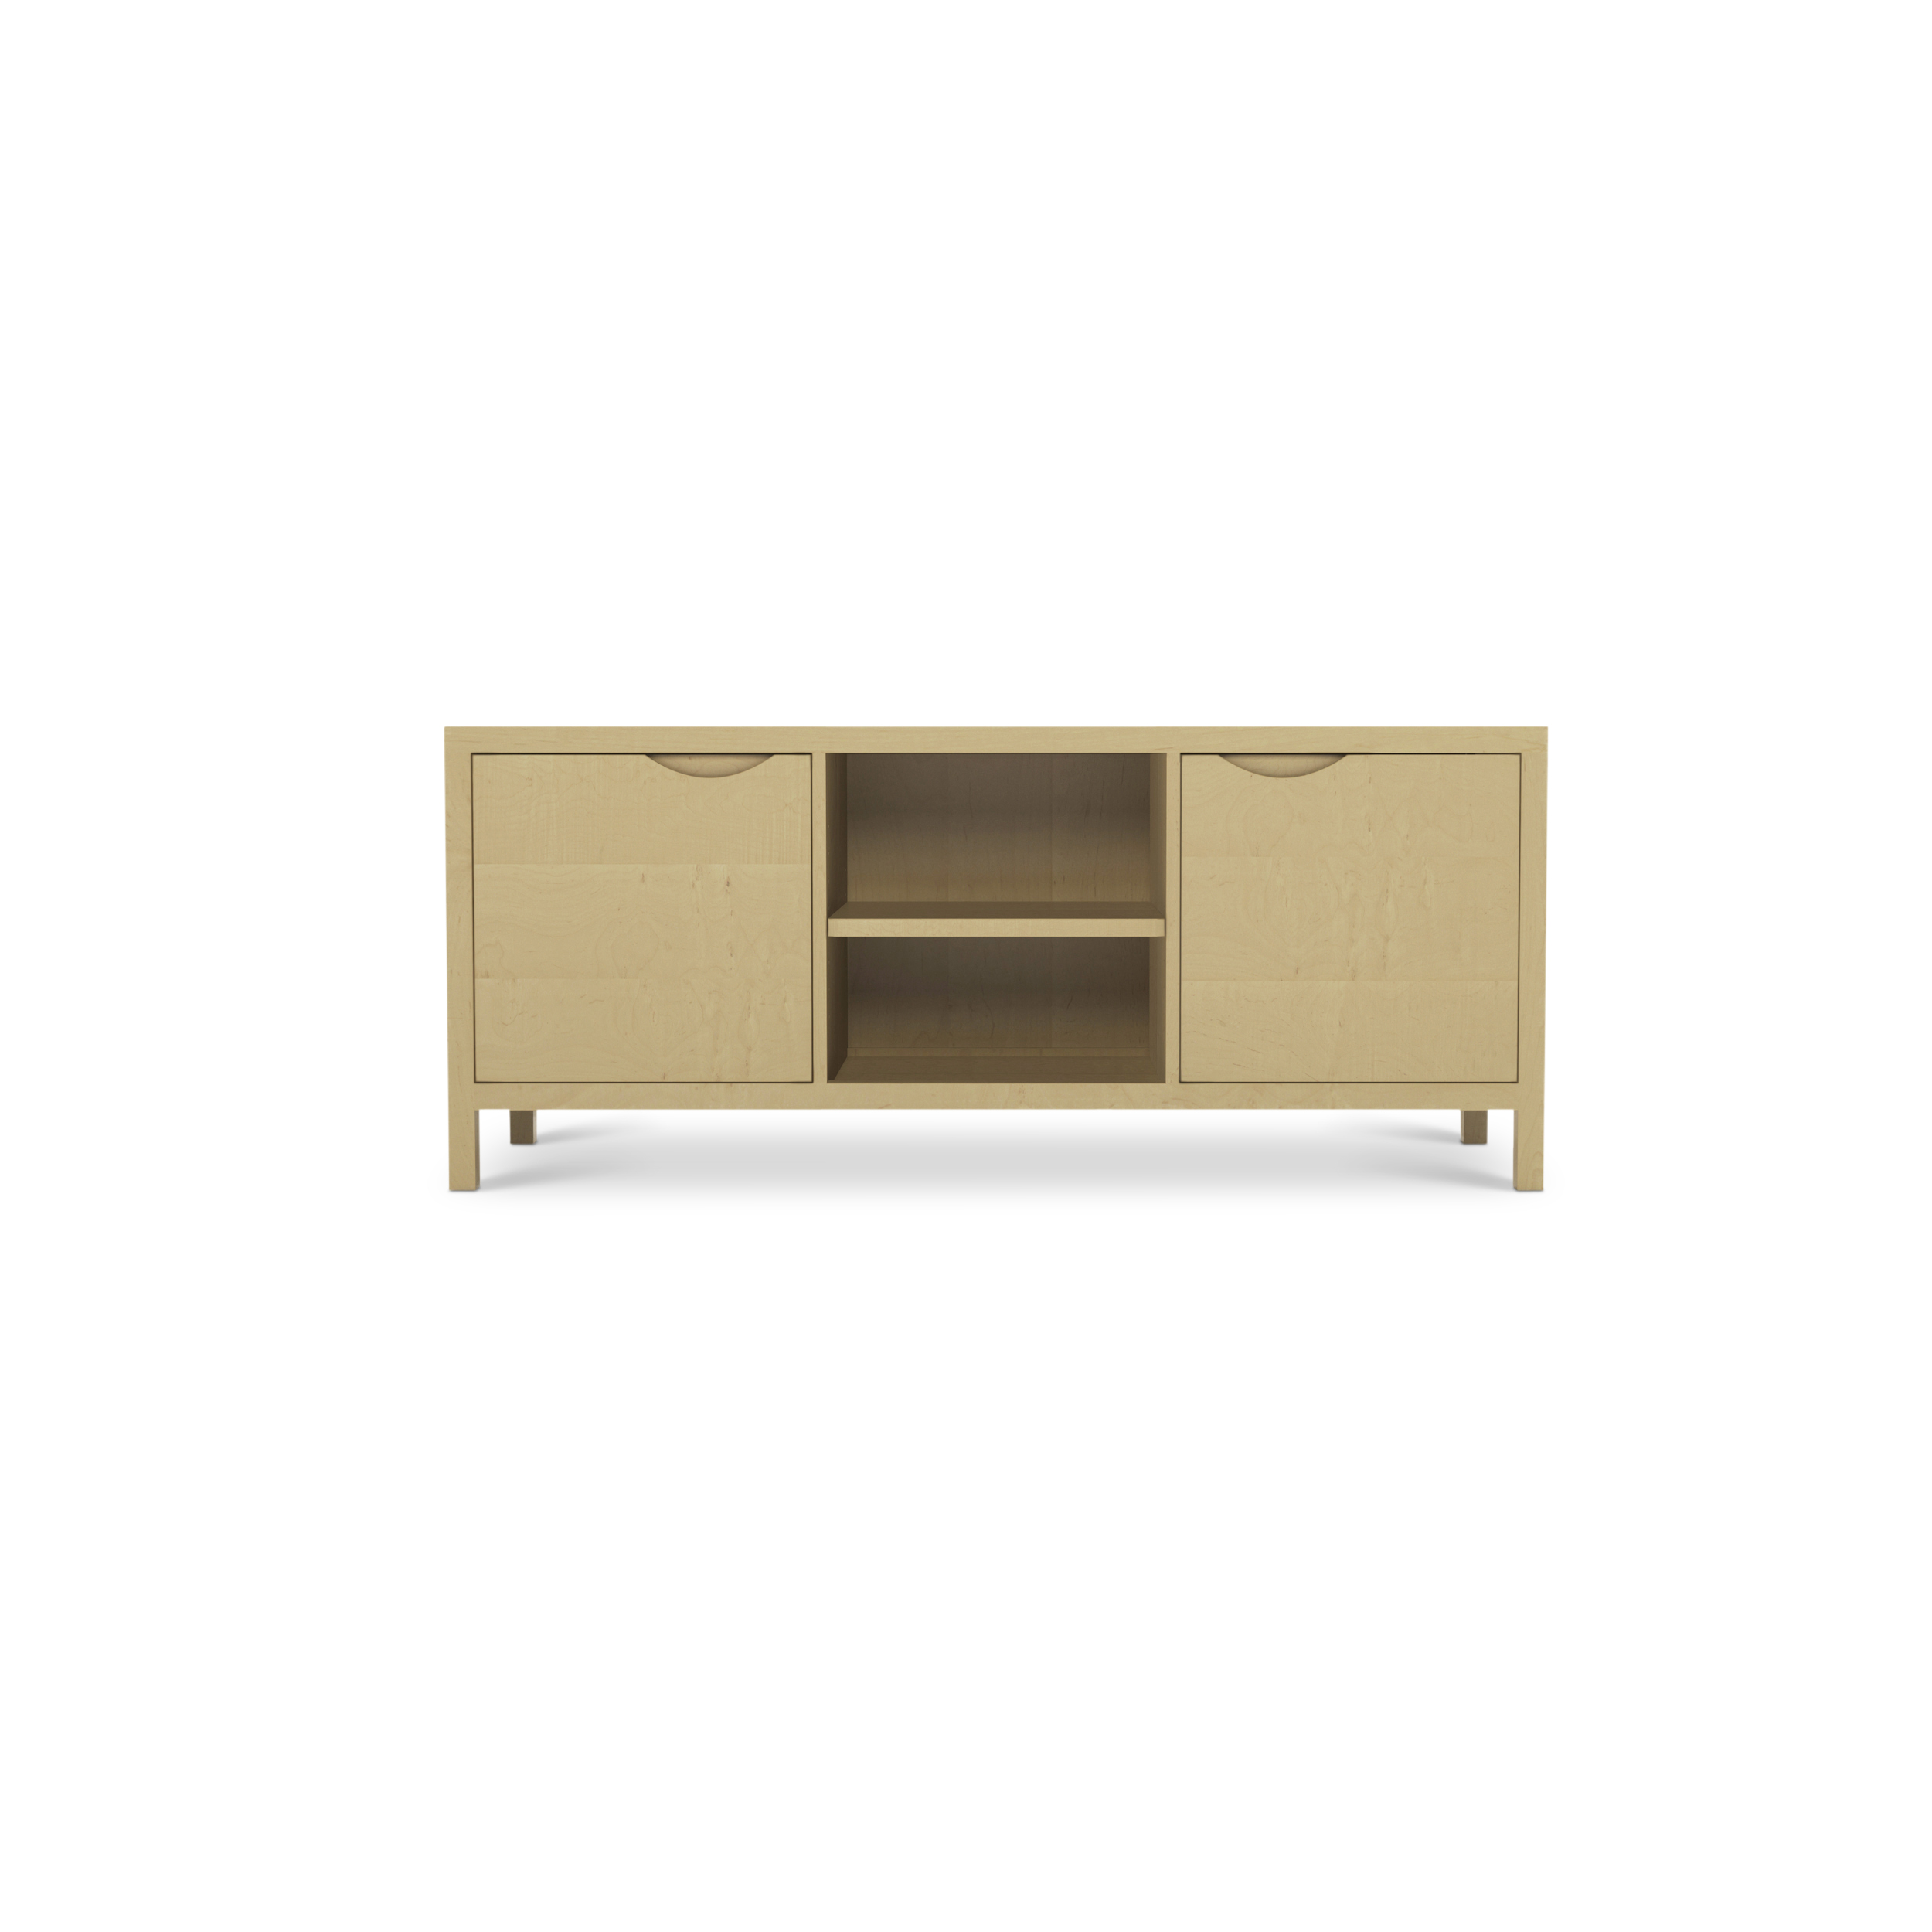 Series 353 Media Cabinet With Two Doors At 60″ In Width